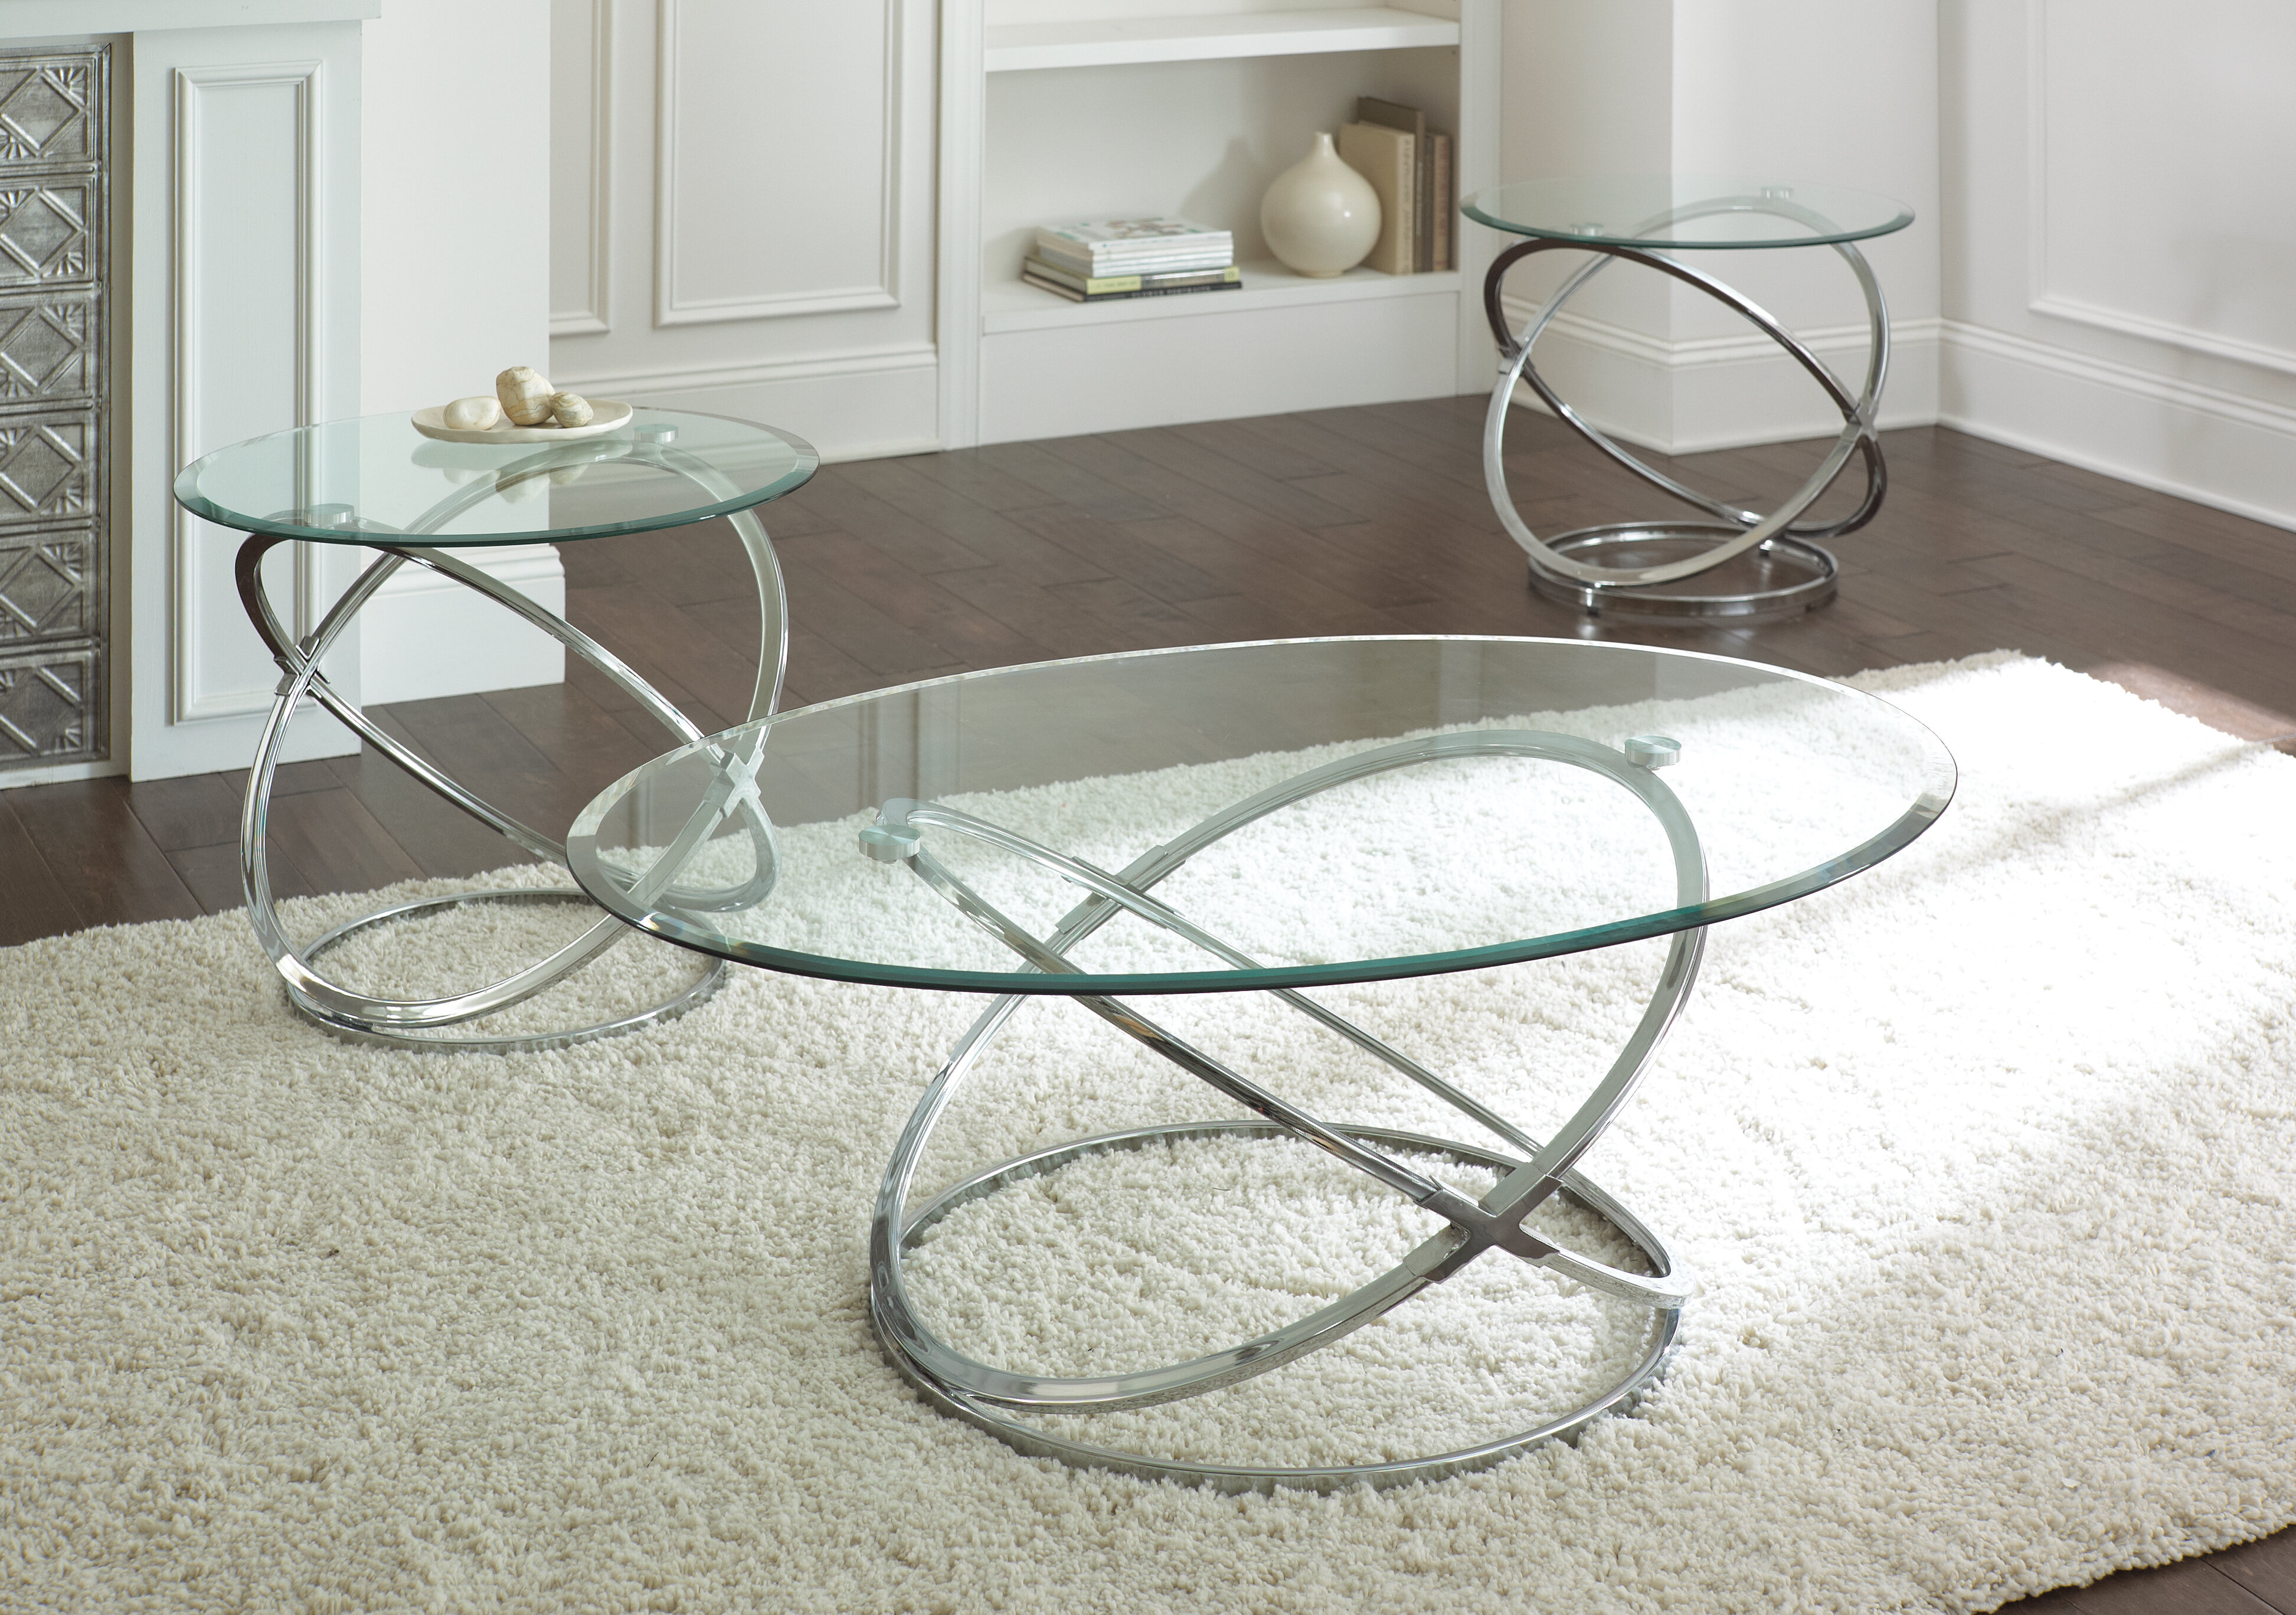 3PCS Modern Coffee End Table Set with a clear glass top and silver arched legs 